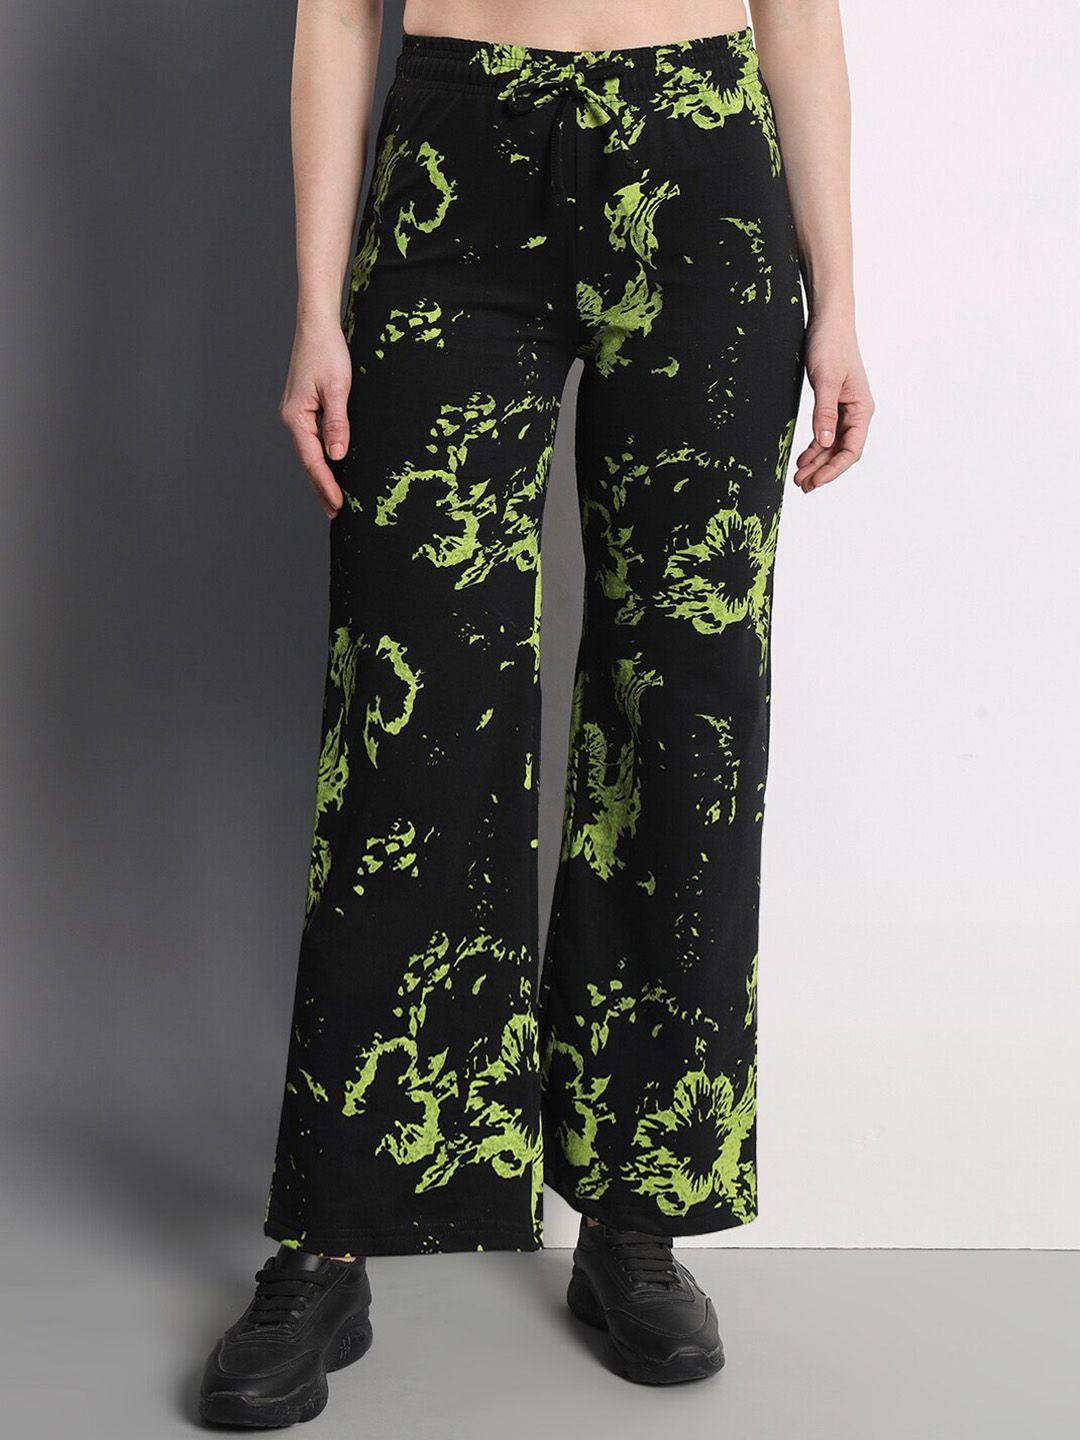 q-rious women flared printed relaxed fit mid rise track pants